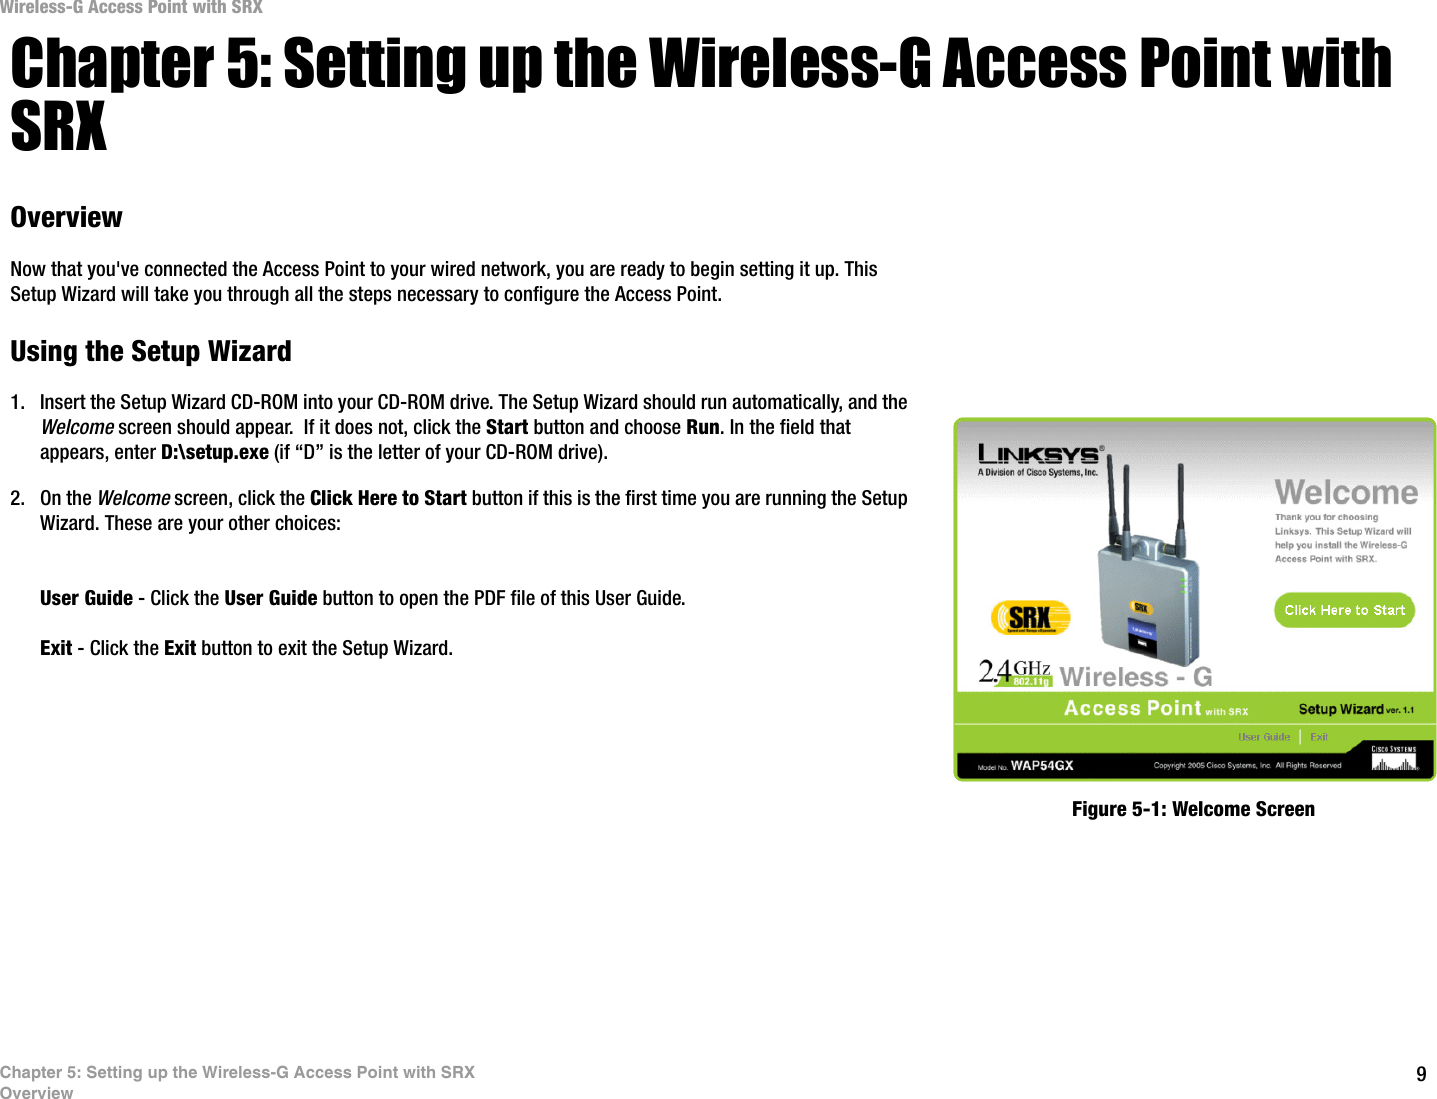 9Chapter 5: Setting up the Wireless-G Access Point with SRXOverviewWireless-G Access Point with SRXChapter 5: Setting up the Wireless-G Access Point with SRXOverviewNow that you&apos;ve connected the Access Point to your wired network, you are ready to begin setting it up. This Setup Wizard will take you through all the steps necessary to configure the Access Point.Using the Setup Wizard1. Insert the Setup Wizard CD-ROM into your CD-ROM drive. The Setup Wizard should run automatically, and the Welcome screen should appear.  If it does not, click the Start button and choose Run. In the field that appears, enter D:\setup.exe (if “D” is the letter of your CD-ROM drive).2. On the Welcome screen, click the Click Here to Start button if this is the first time you are running the Setup Wizard. These are your other choices:User Guide - Click the User Guide button to open the PDF file of this User Guide.Exit - Click the Exit button to exit the Setup Wizard.Figure 5-1: Welcome Screen